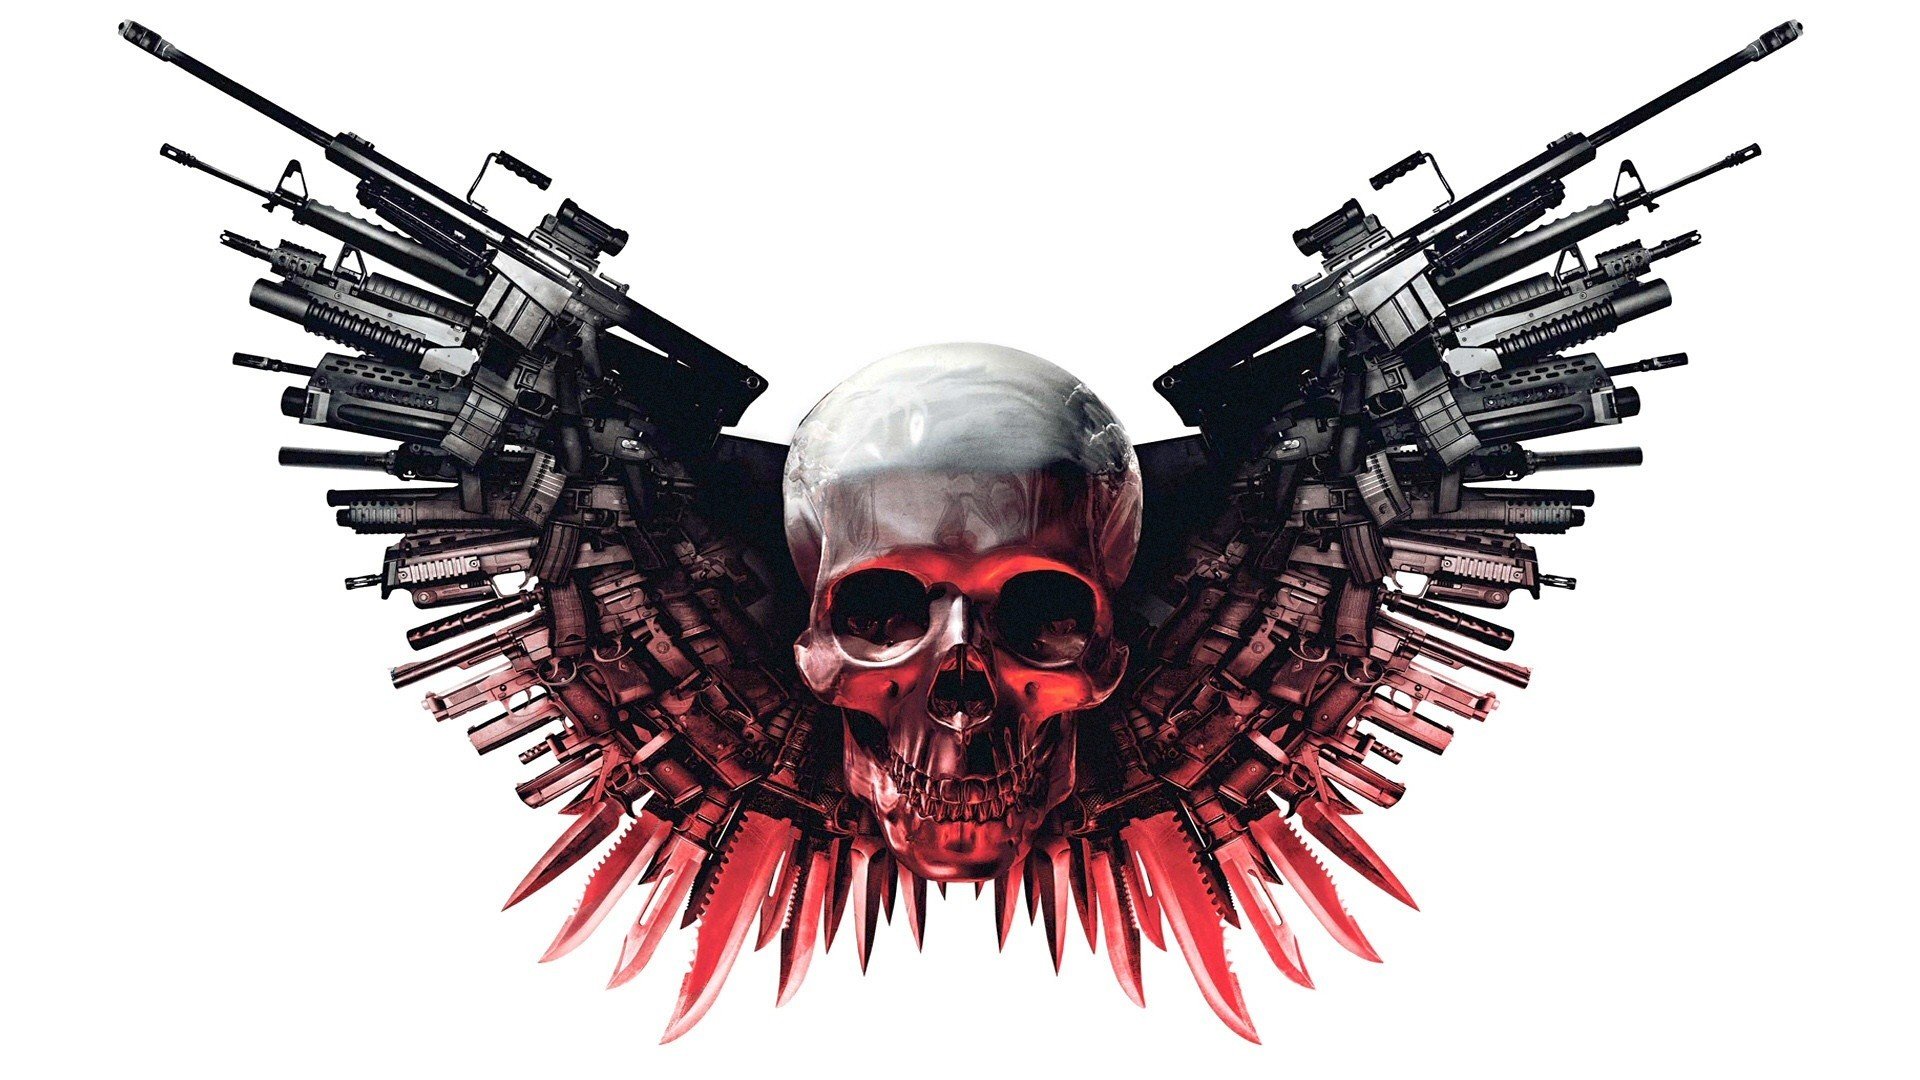 The Expendables, Weapon, Gun, Skull Wallpaper